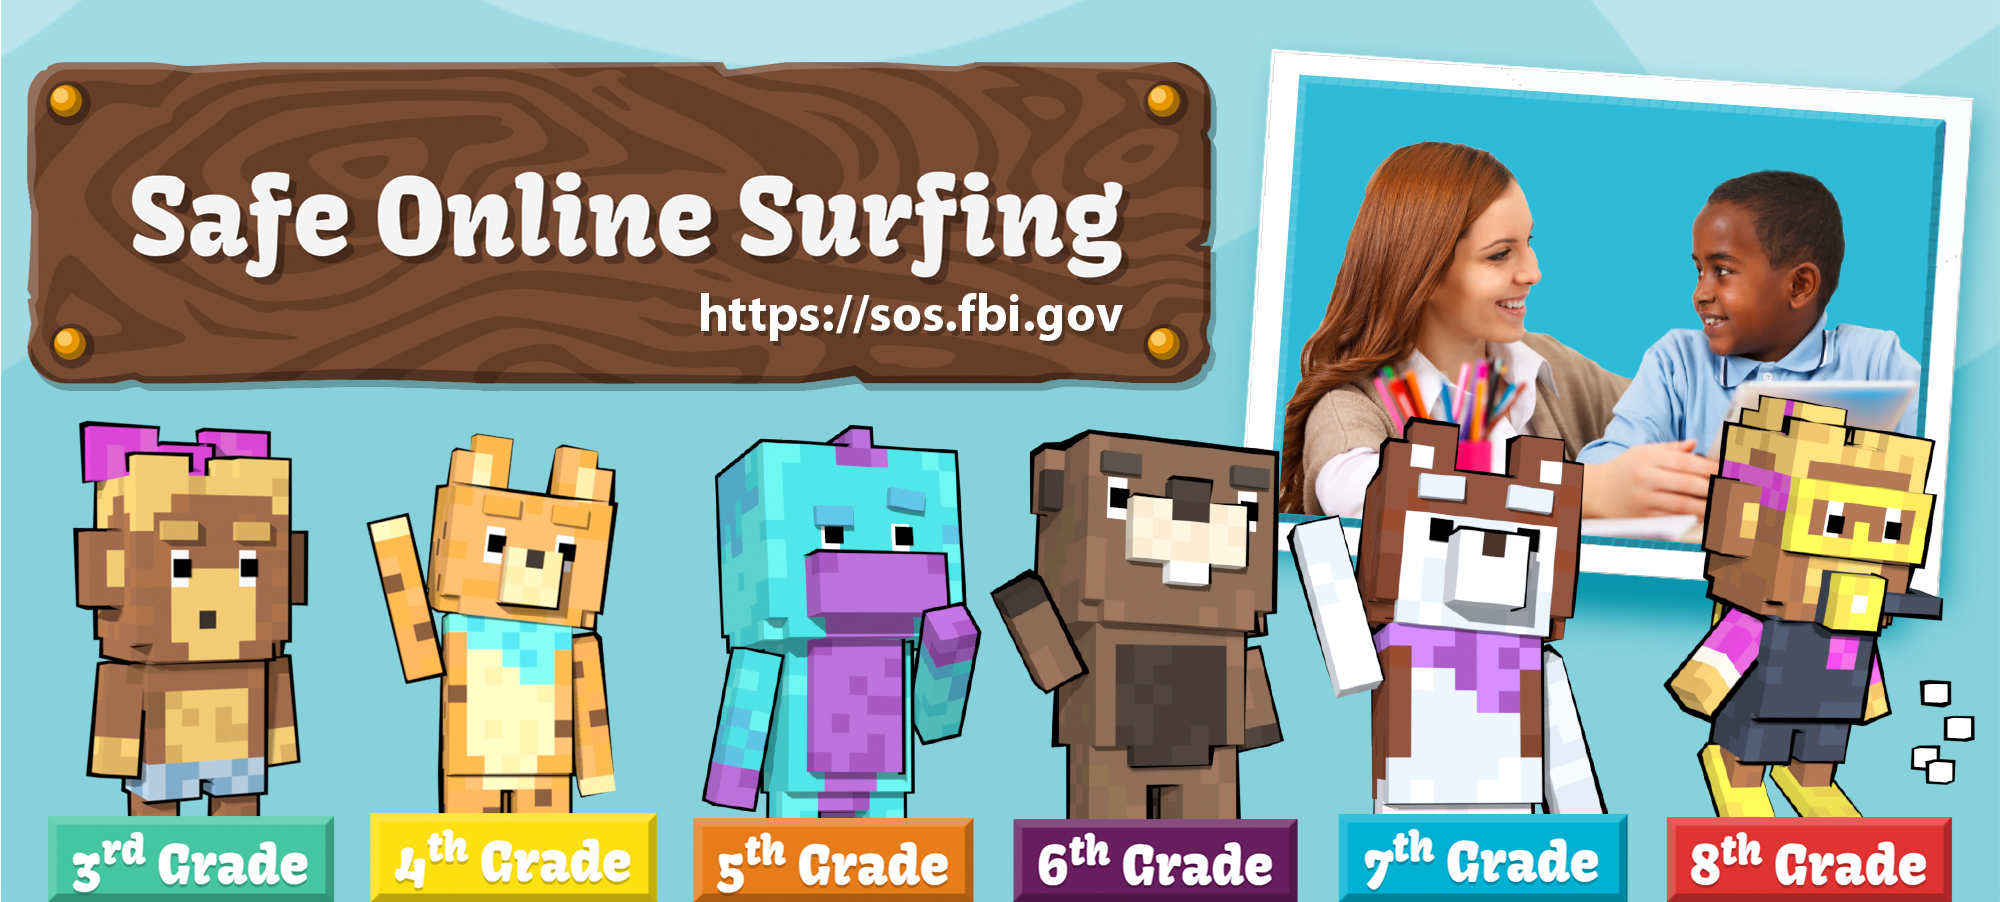 The FBI has refreshed its Safe Online Surfing (SOS) Internet Challenge—a free, educational program for children that teaches cyber safety—with a new interface and updated content.

The SOS program, created for students in third through eighth grades, covers age-appropriate topics like cyberbullying, passwords, malware, social media, and more. The program also provides teachers with a curriculum that meets state and federal internet safety mandates. 

Image shows characters from all the grade levels. Visit https://sos.fbi.gov to enroll or take the SOS program.